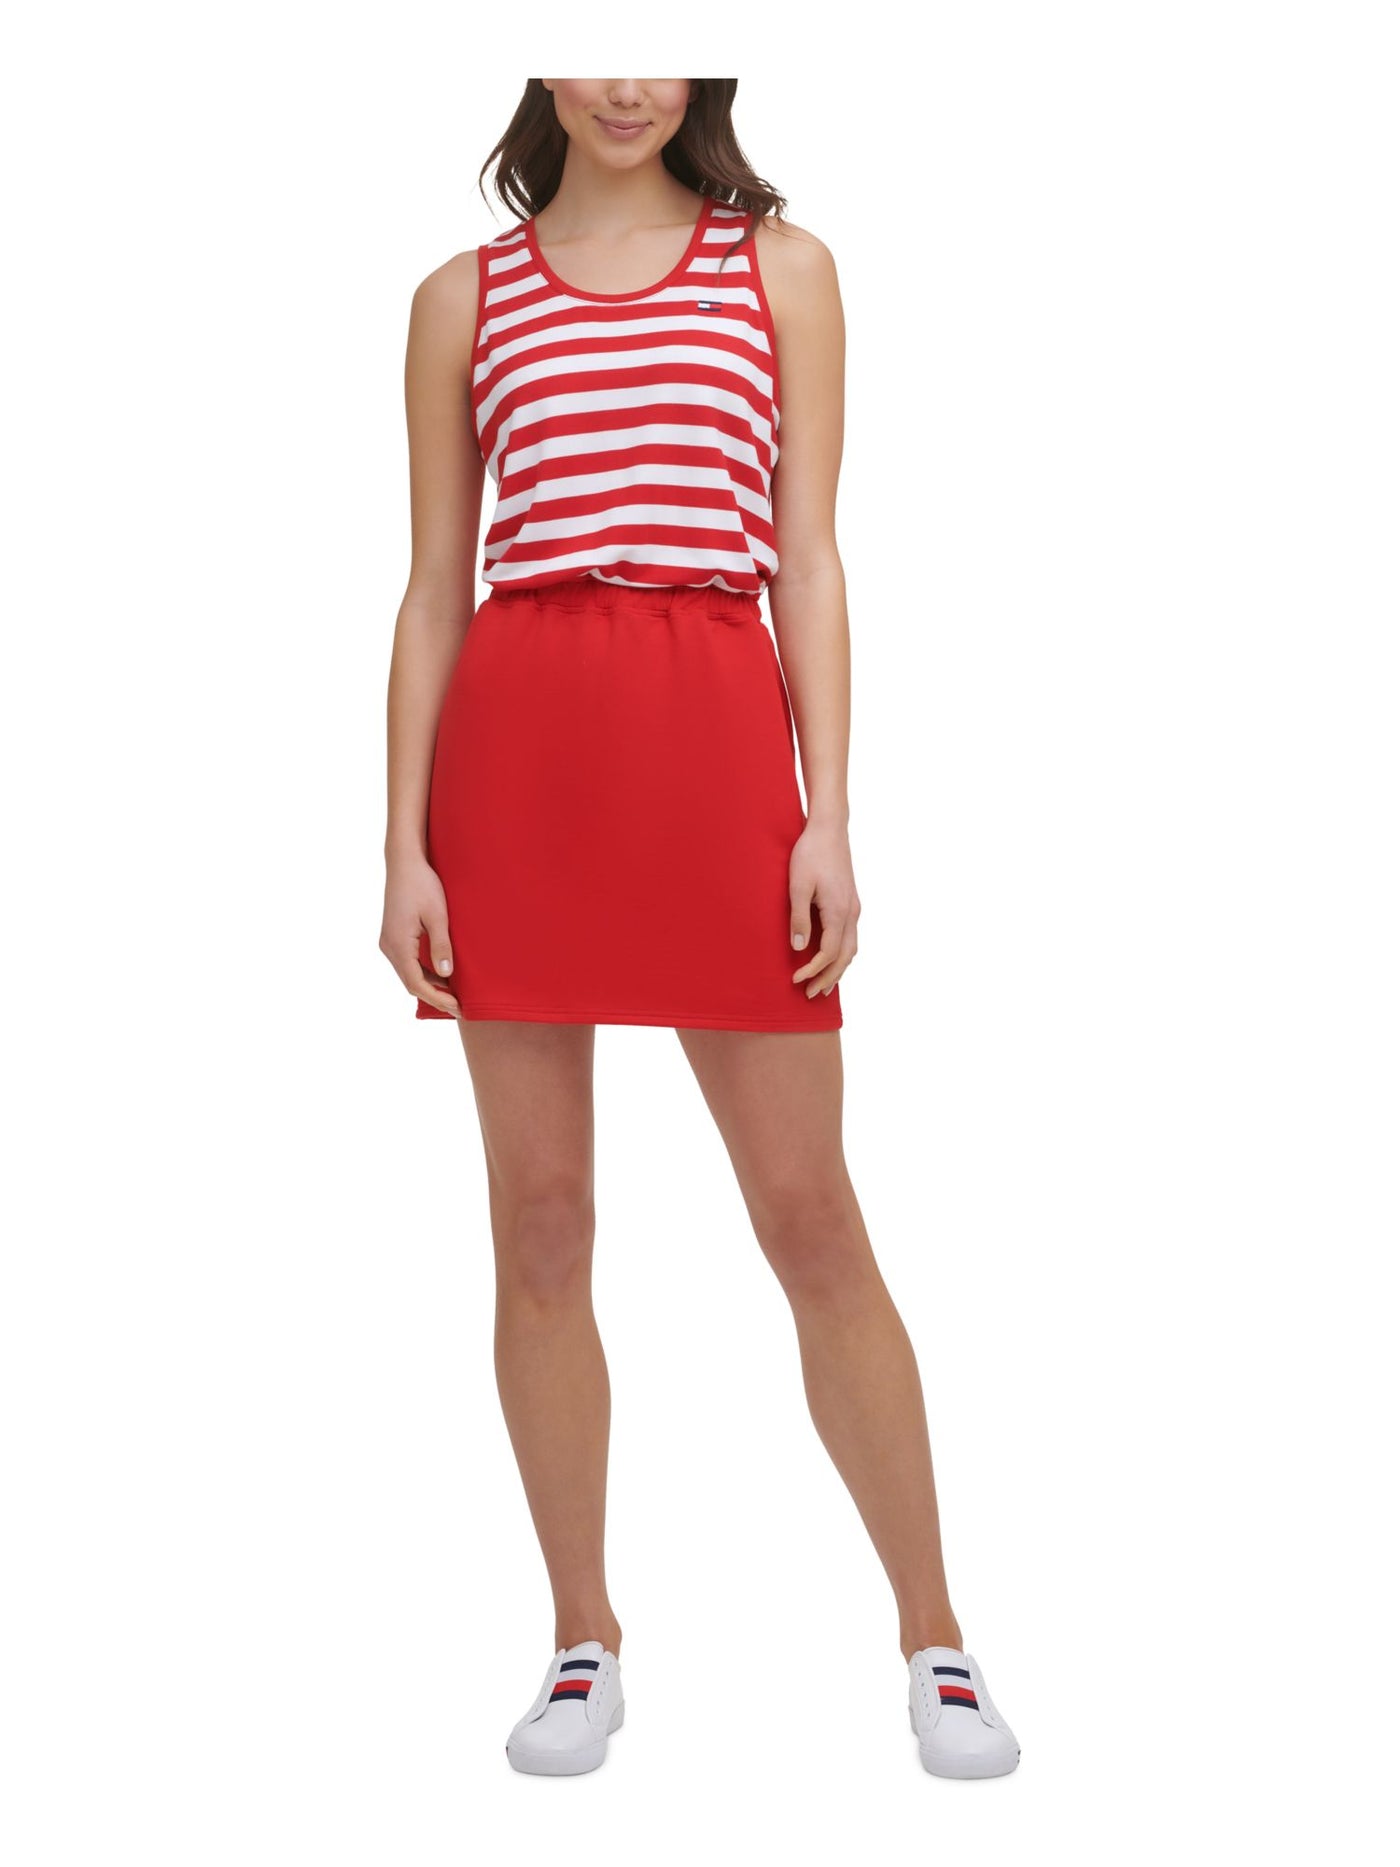 TOMMY HILFIGER SPORT Womens Red Stretch Embroidered Terry Cinched-waist Striped Sleeveless Scoop Neck Short Sheath Dress M